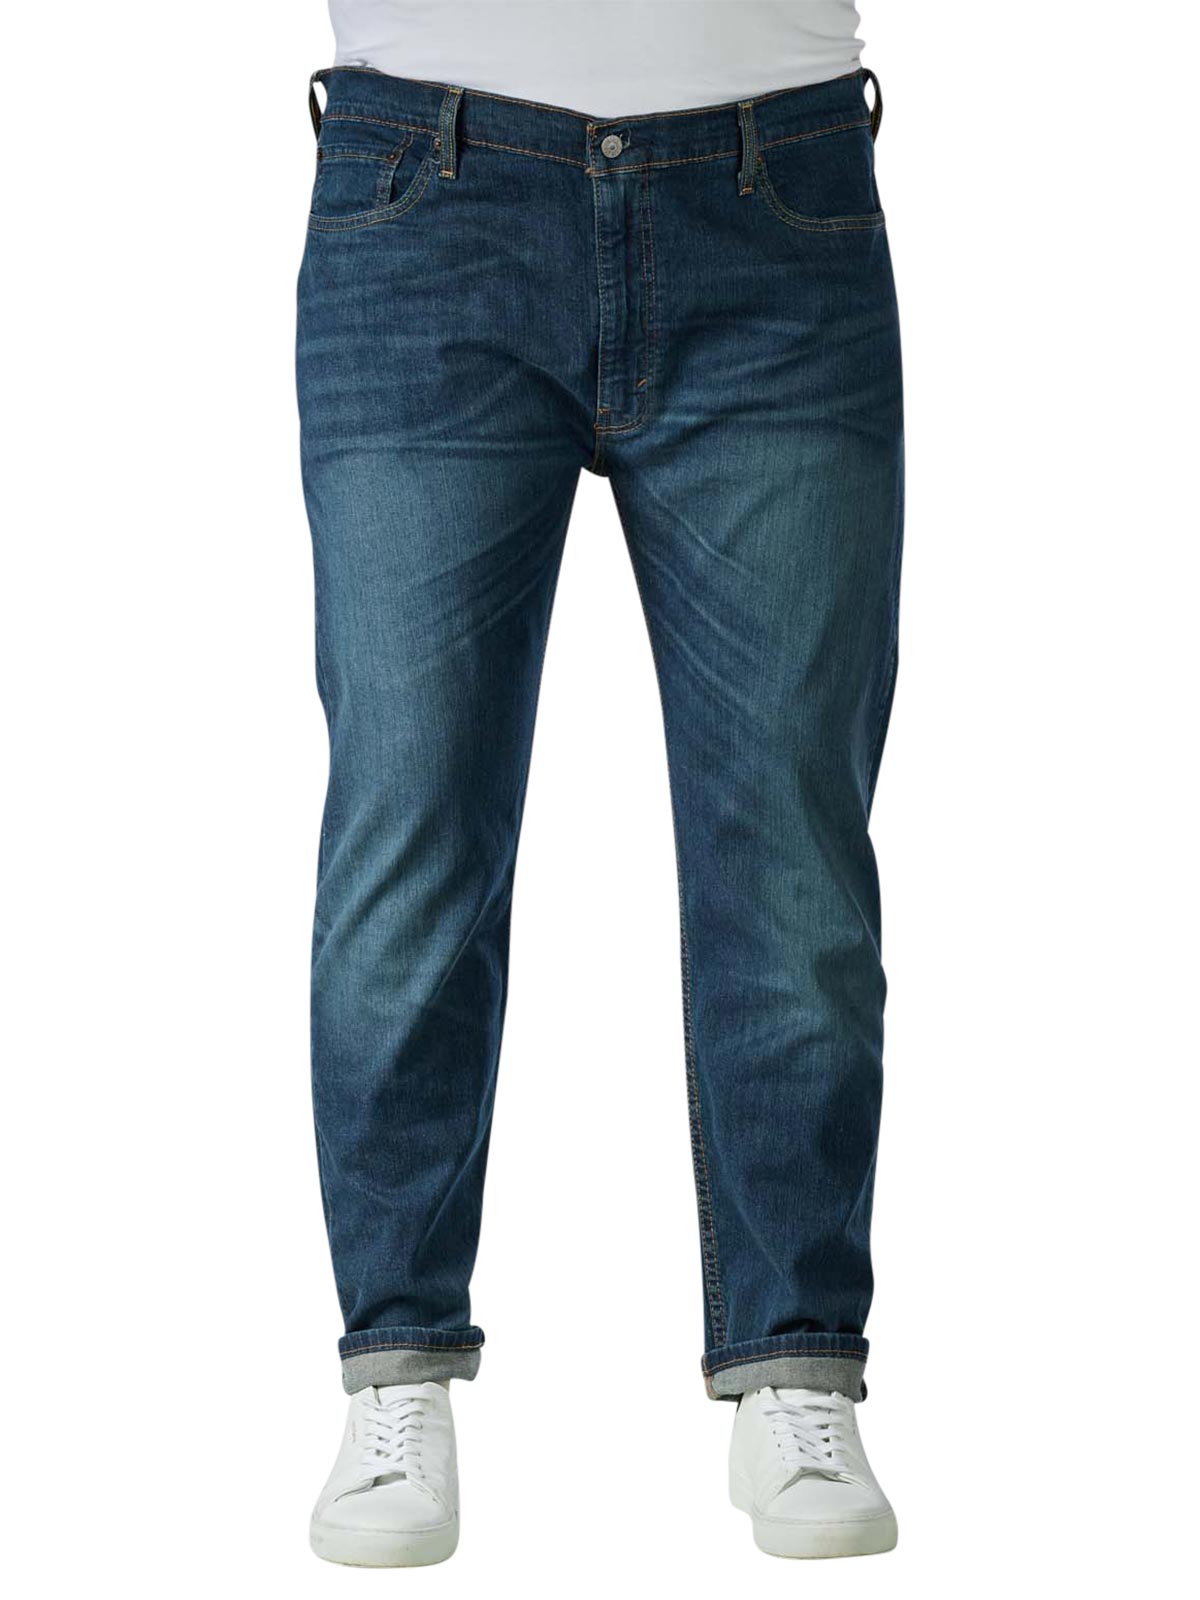 Levi's 502 Big & Tall Jeans Tapered Fit rosefinch Levi's Men's Jeans | Free  Shipping on  - SIMPLY LOOK GOOD